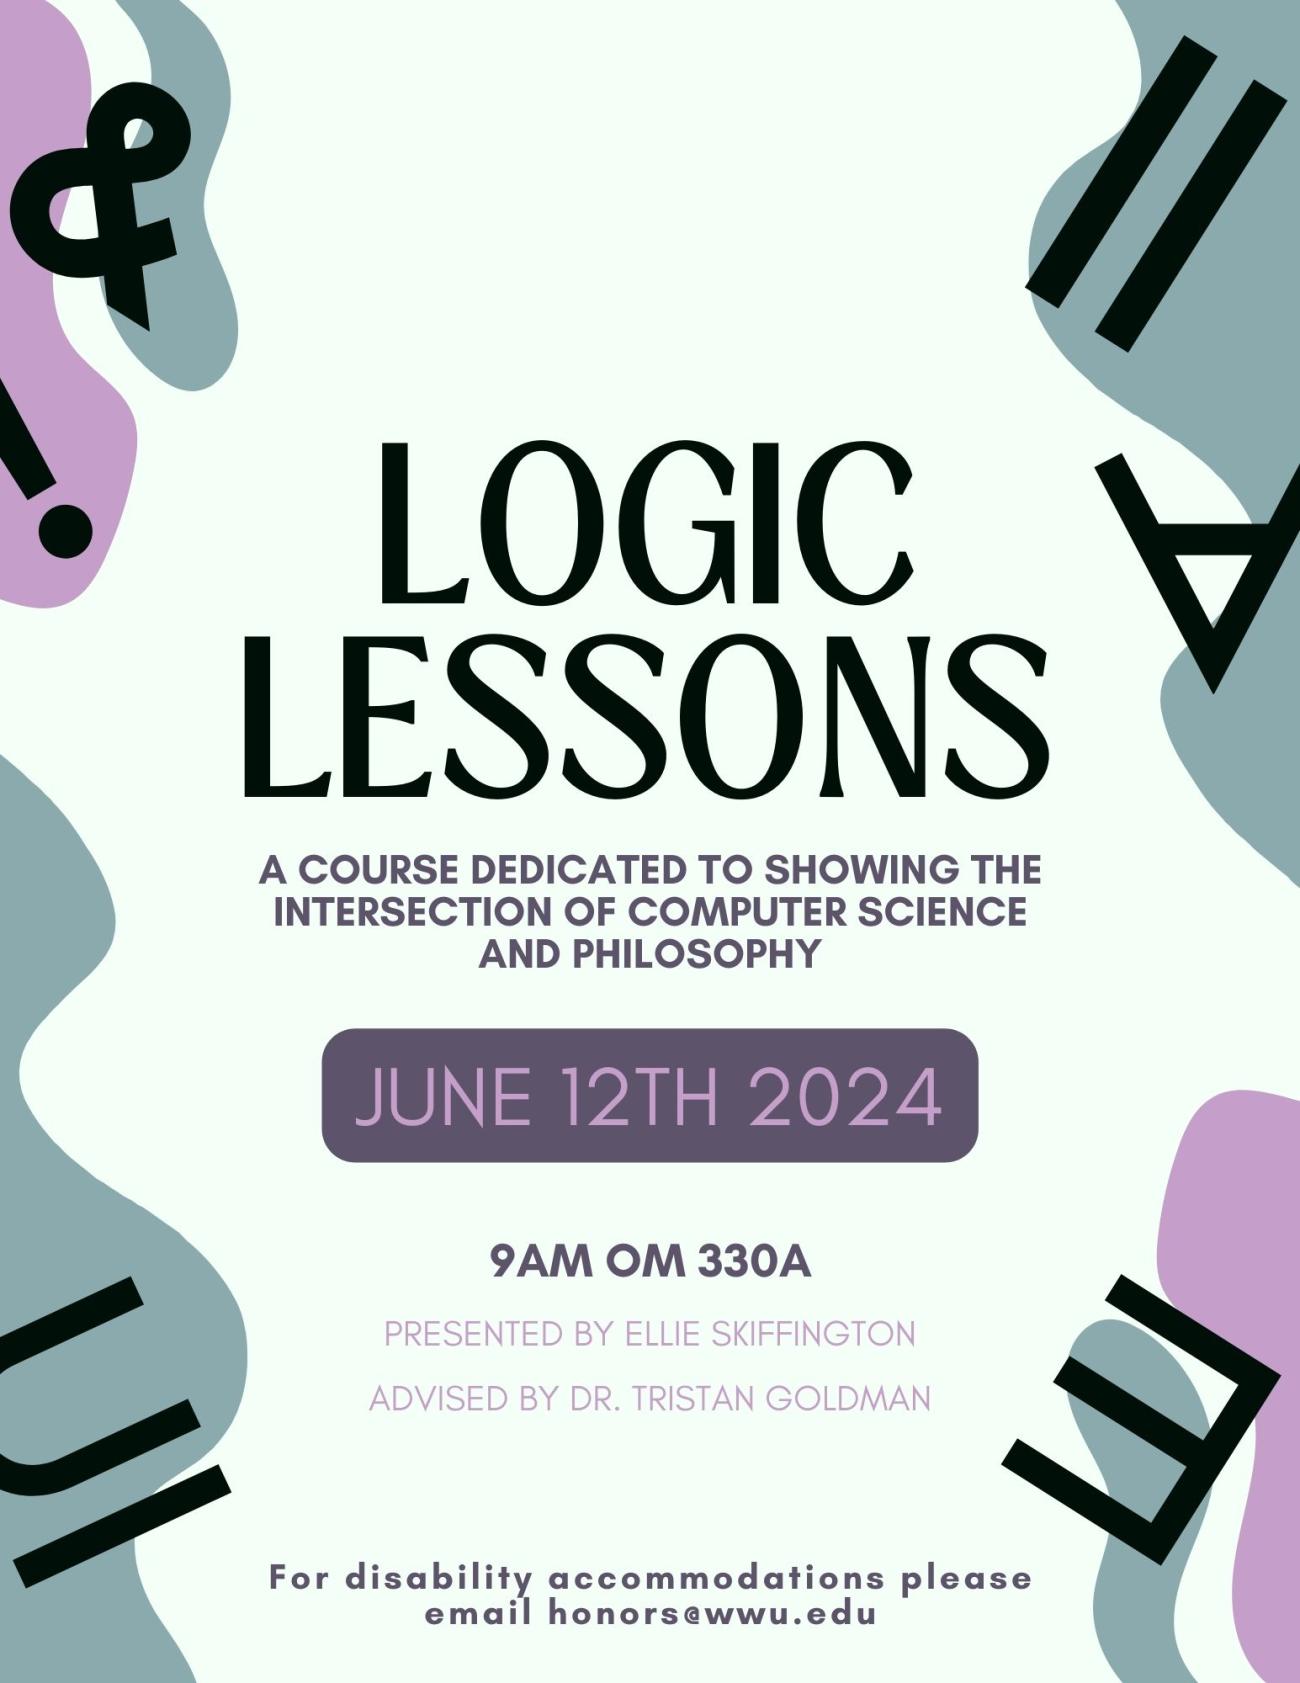 Blue and purple poster with logic symbols displaying the following text: Logic Lessons: A Course Dedicated to showing the intersection of Computer Science and Philosophy, June 12th 2024, 9am OM 330A, Presented By Ellie Skiffington, Advised by Dr. Tristan Goldman, For disability accommodations please email honors@wwu.edu. 